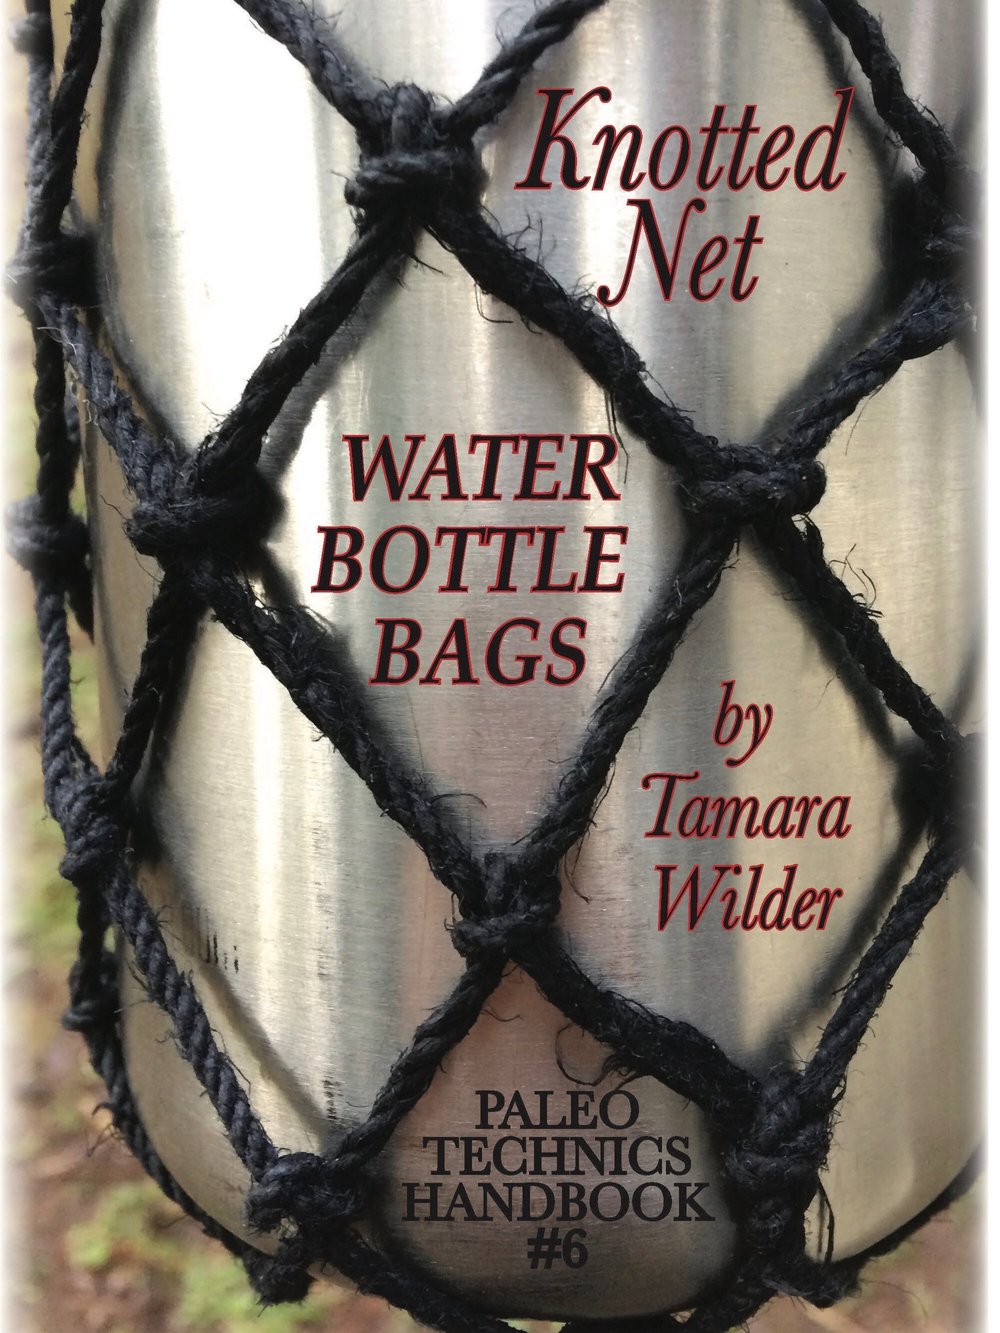 Knotted Net Water Bottle Bags